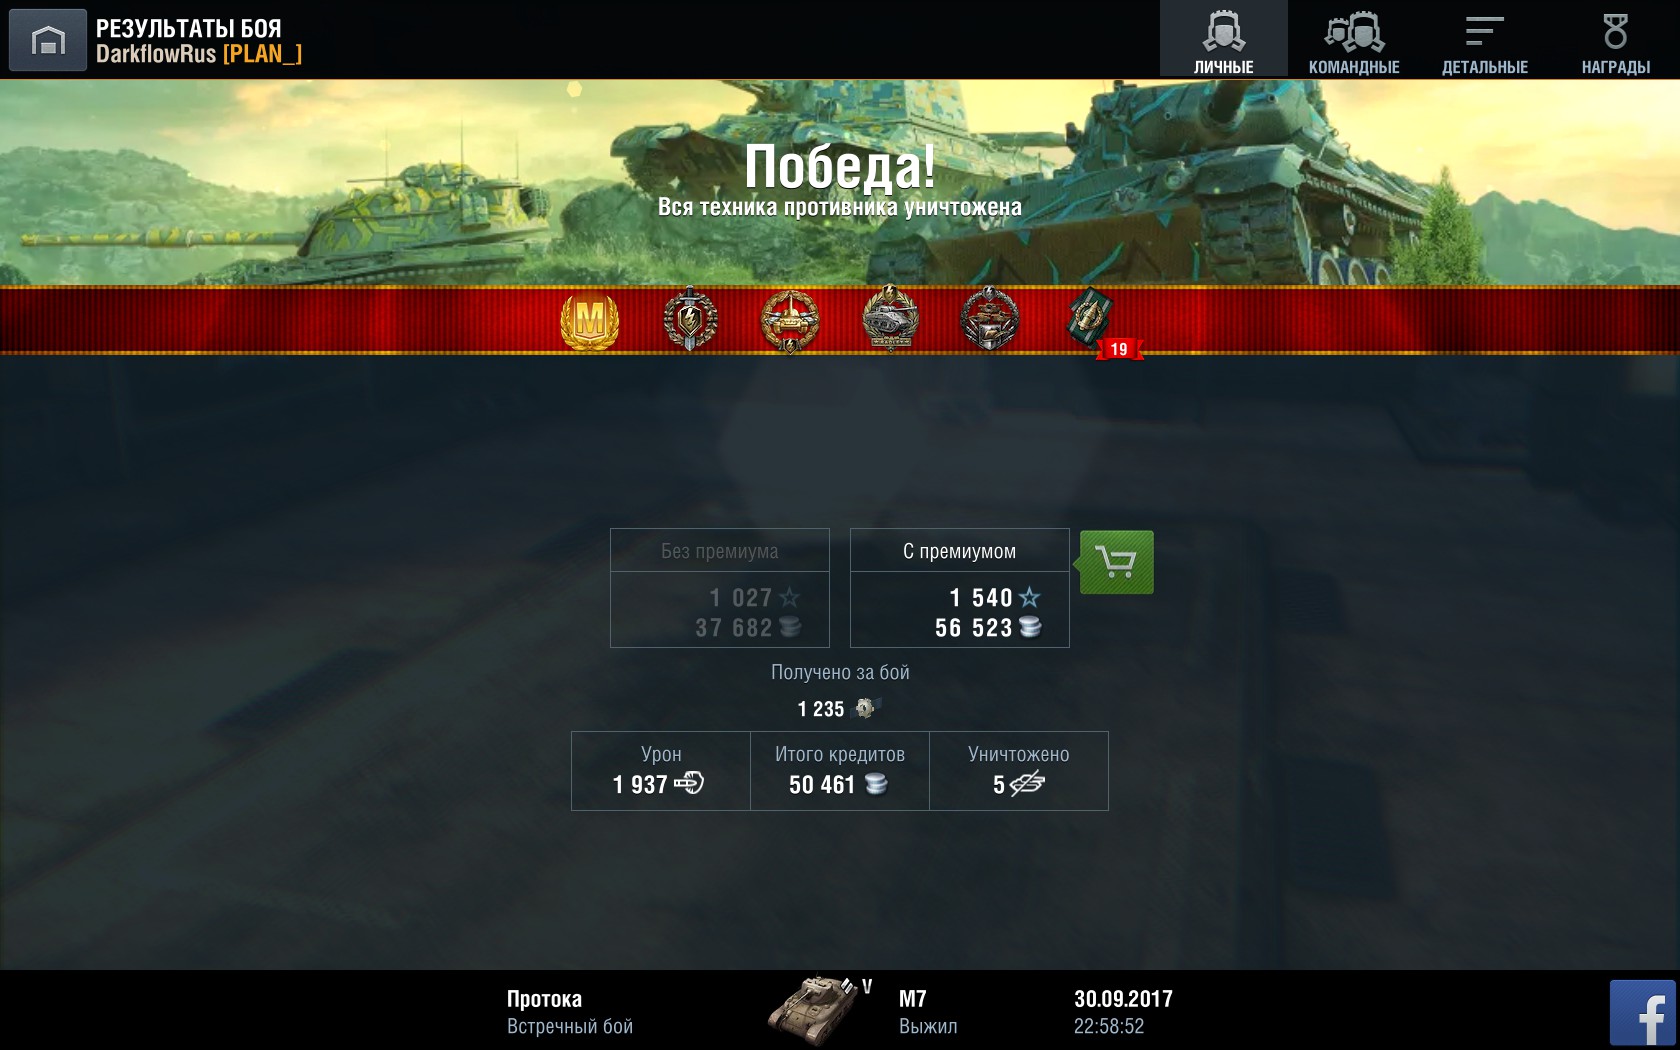 world of tanks blitz open test 5.5 how to join